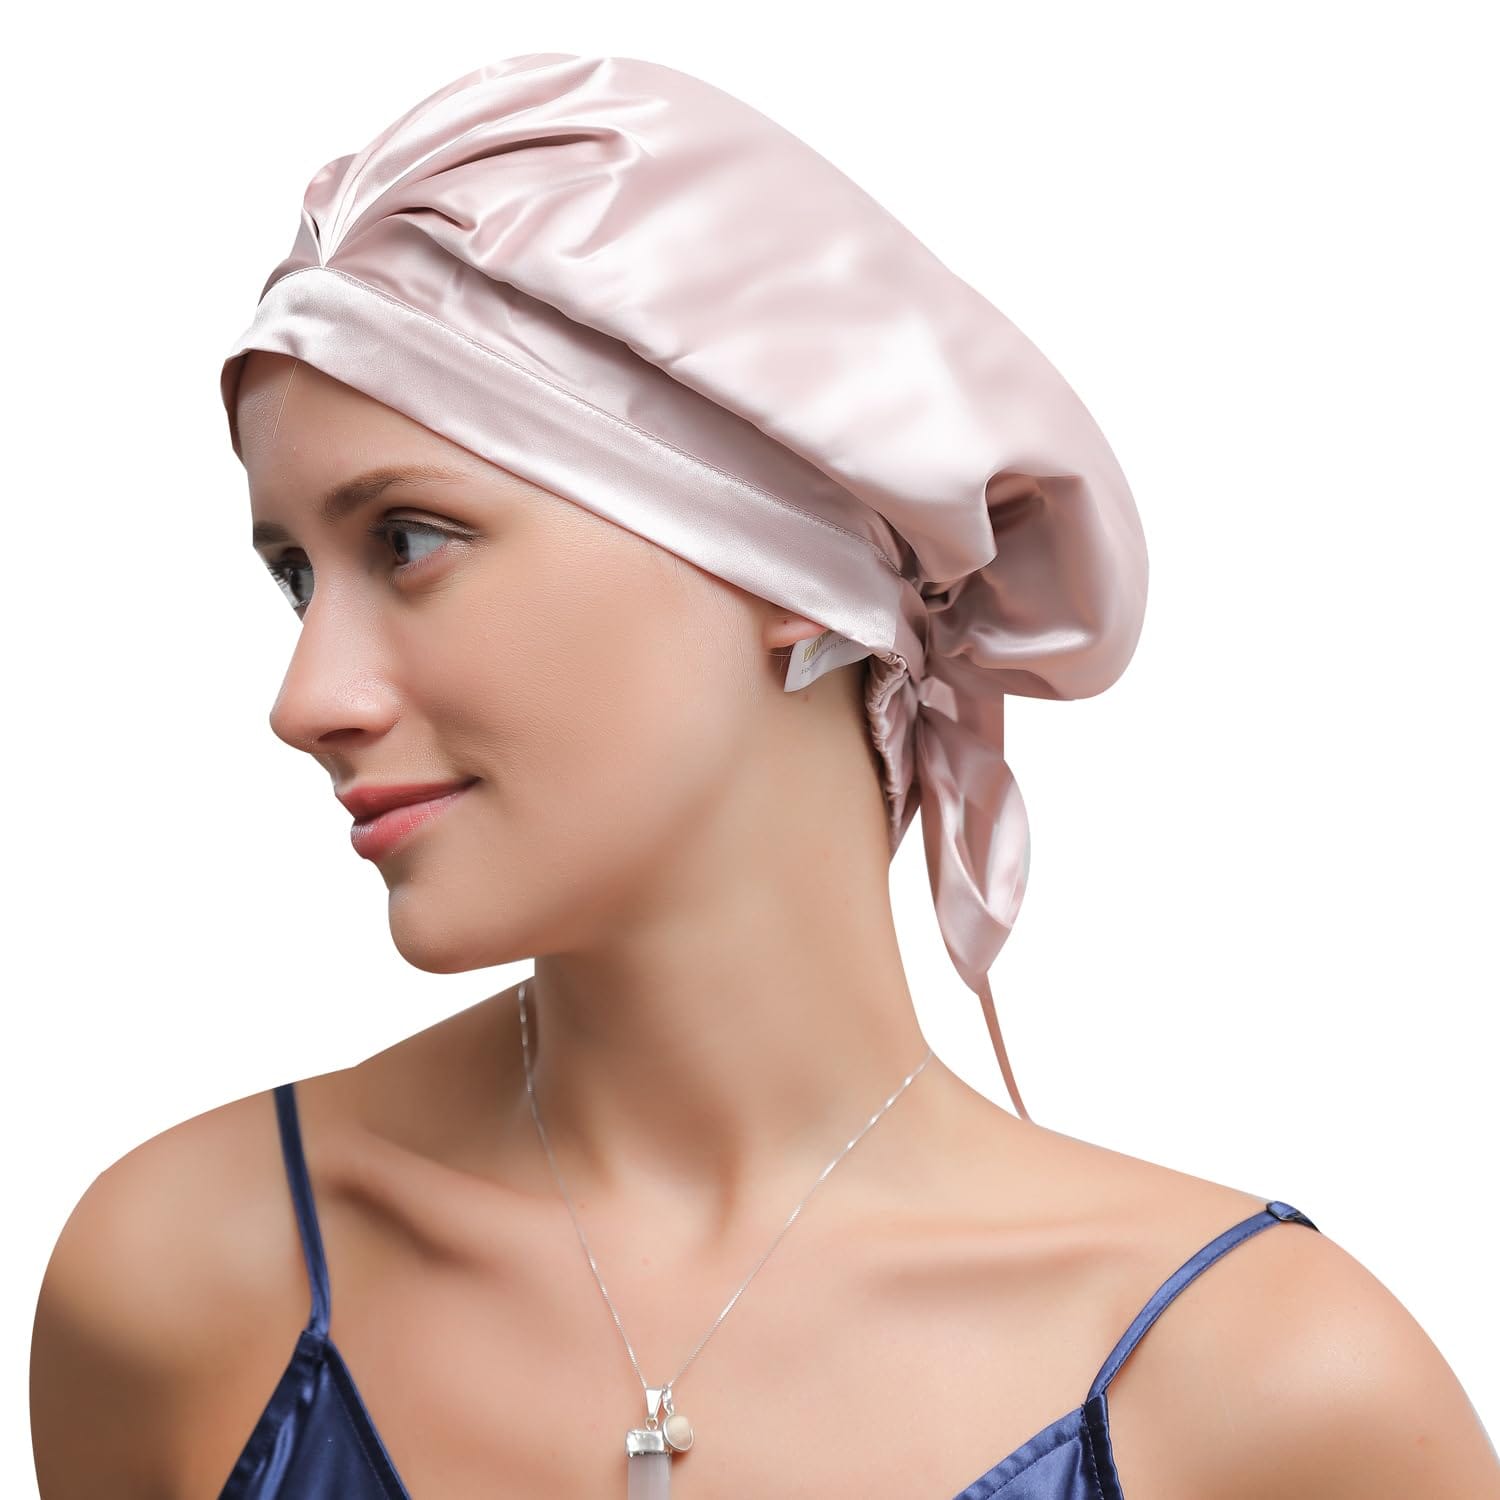 Top-Rated Silk Bonnets for Natural Hair: Sleep in Style & Comfort